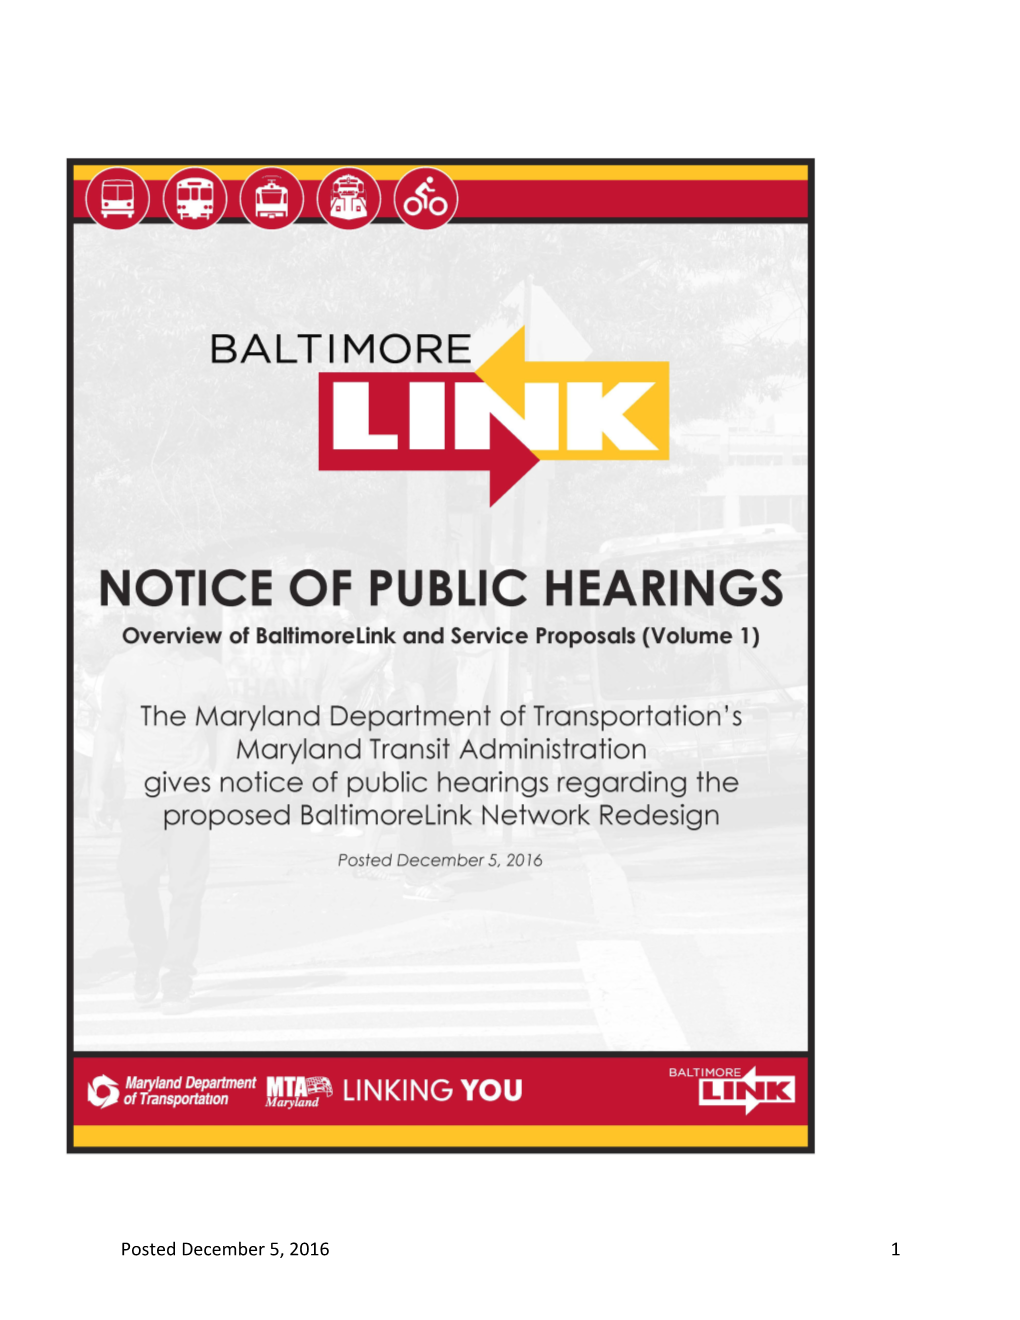 Volume One of Two: Overview of Baltimorelink and Service Proposals